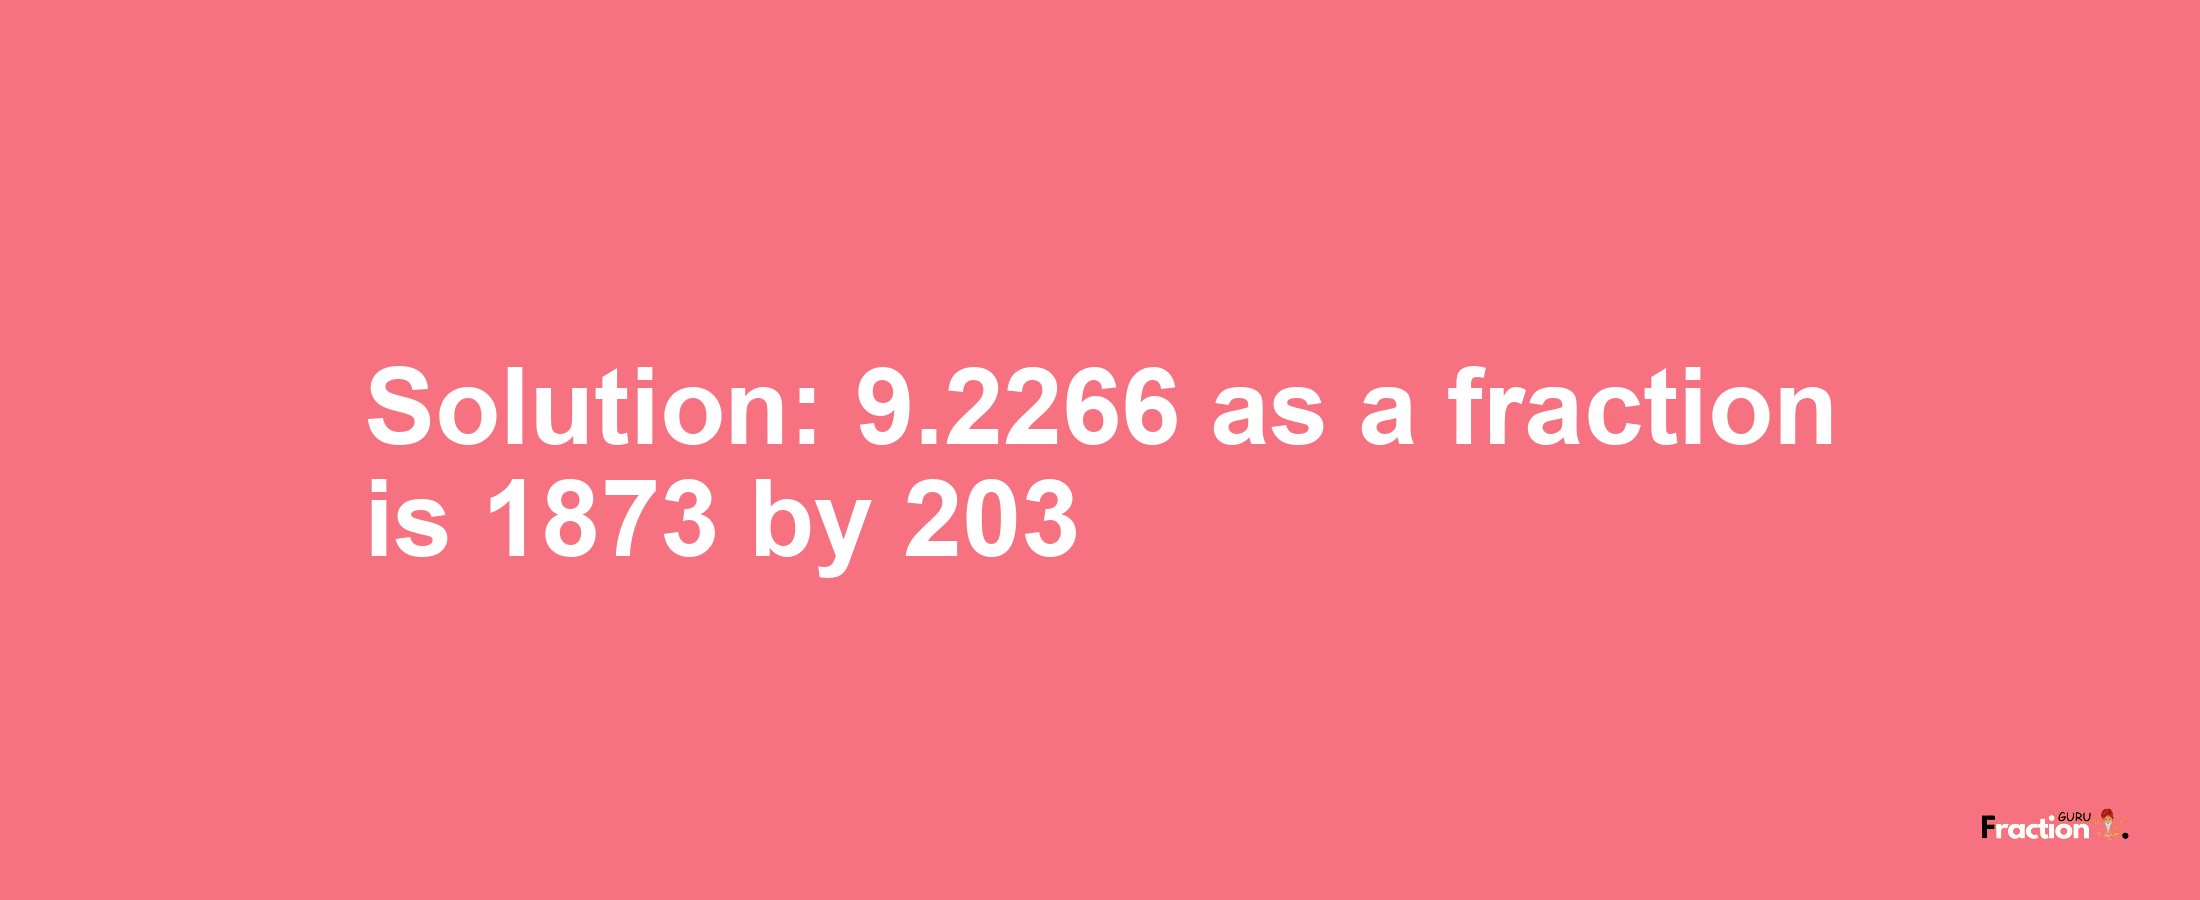 Solution:9.2266 as a fraction is 1873/203